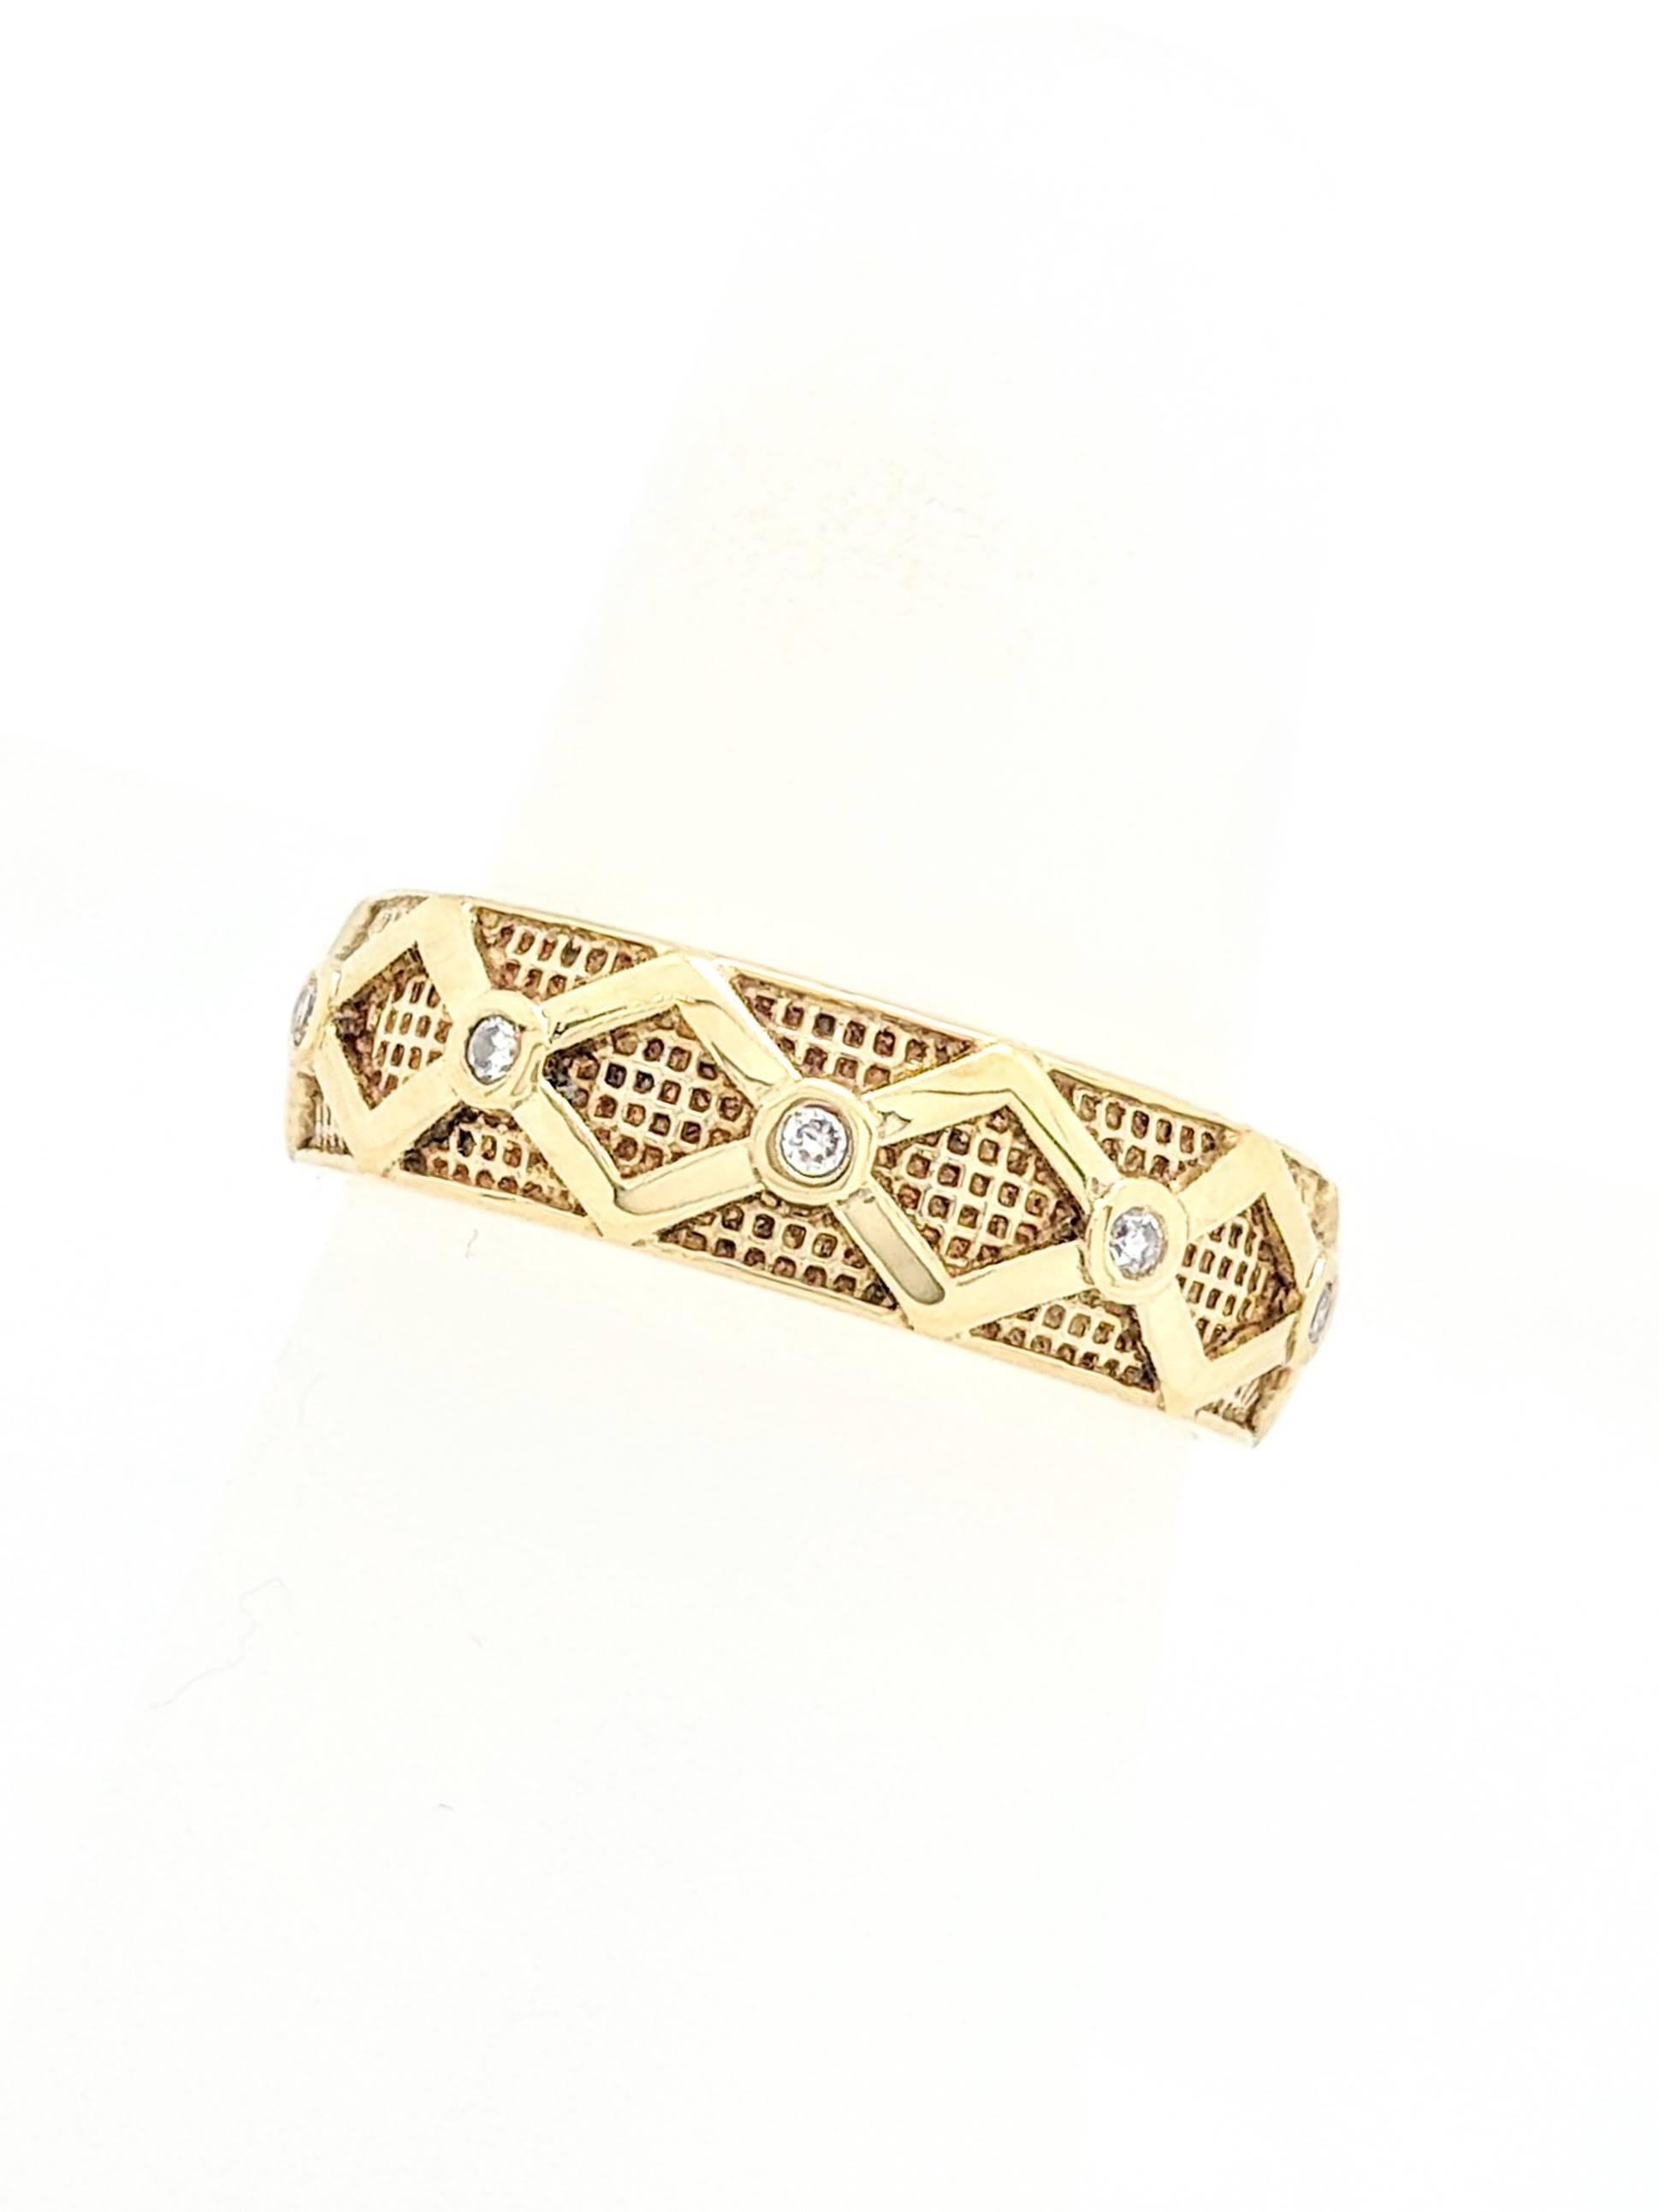 Hidalgo 18K Yellow Gold Diamond Eternity Band Ring Size 6

You are viewing a Beautiful Ladies Hidalgo Diamond Eternity Band. This band is crafted from 18k yellow gold and weighs 6.9 grams. It features (10) .01ct round natural diamonds for an